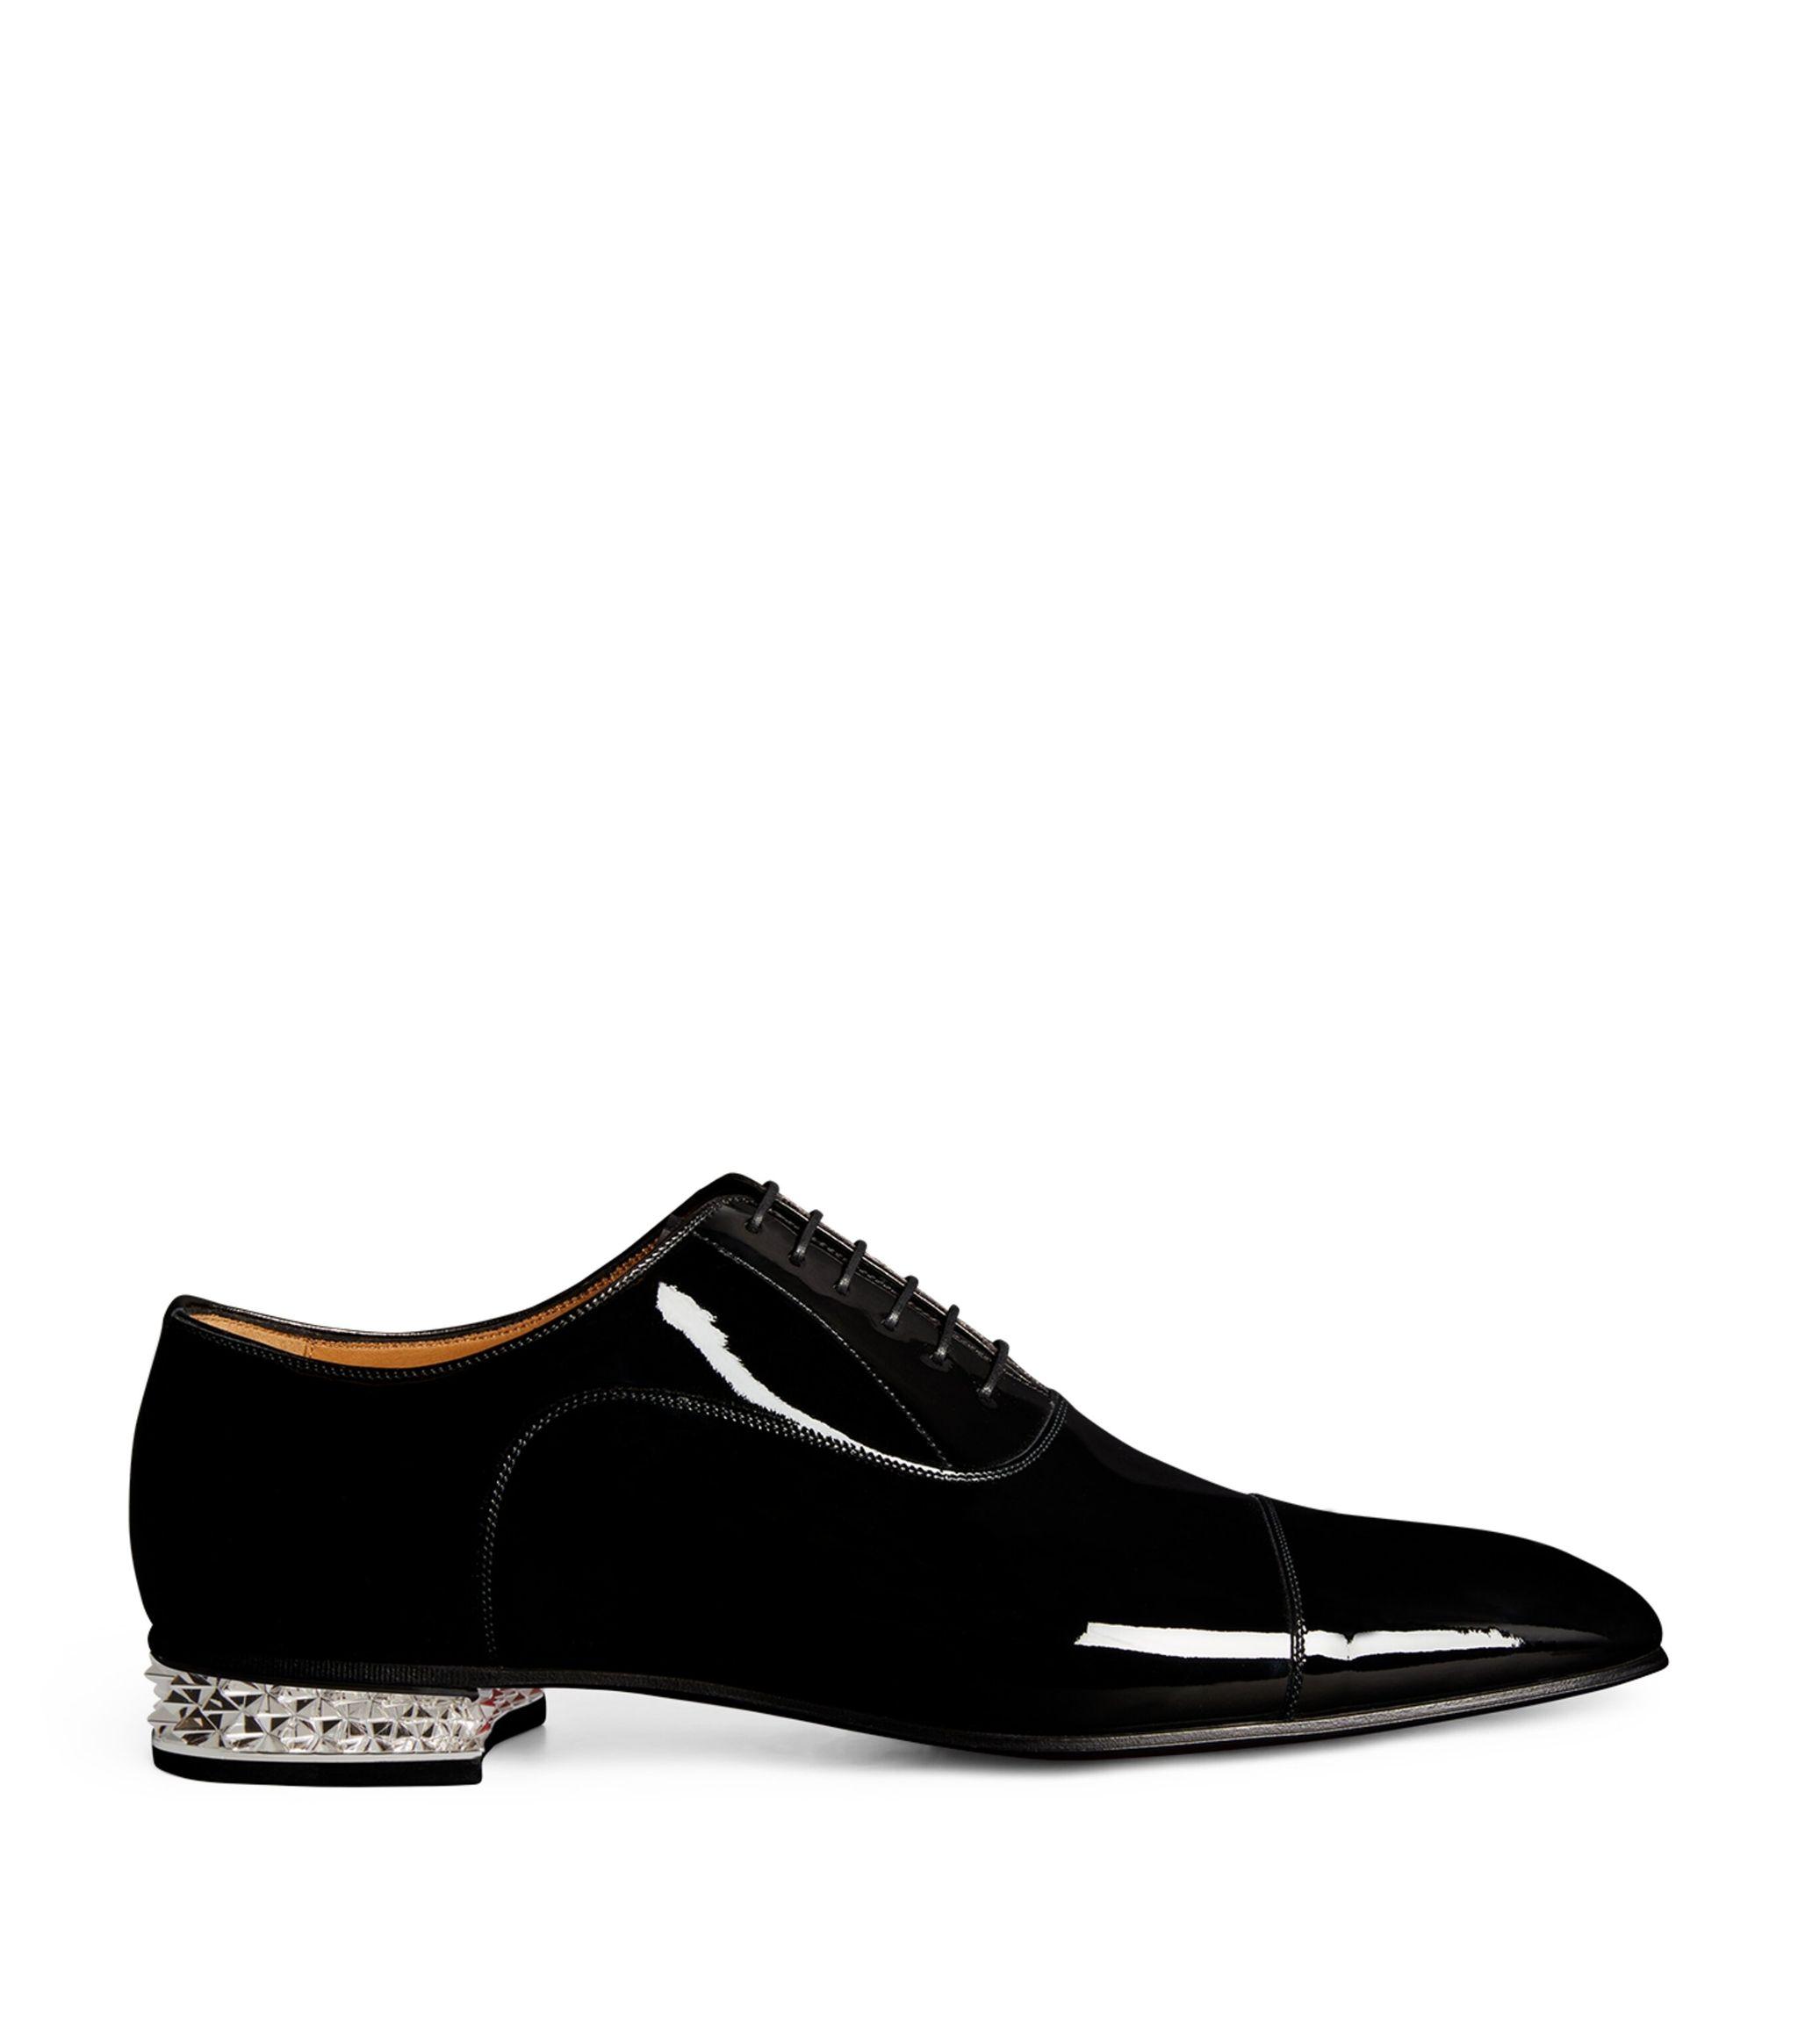 Christian Louboutin Greggyrocks Patent Leather Oxford Shoes in Black ...